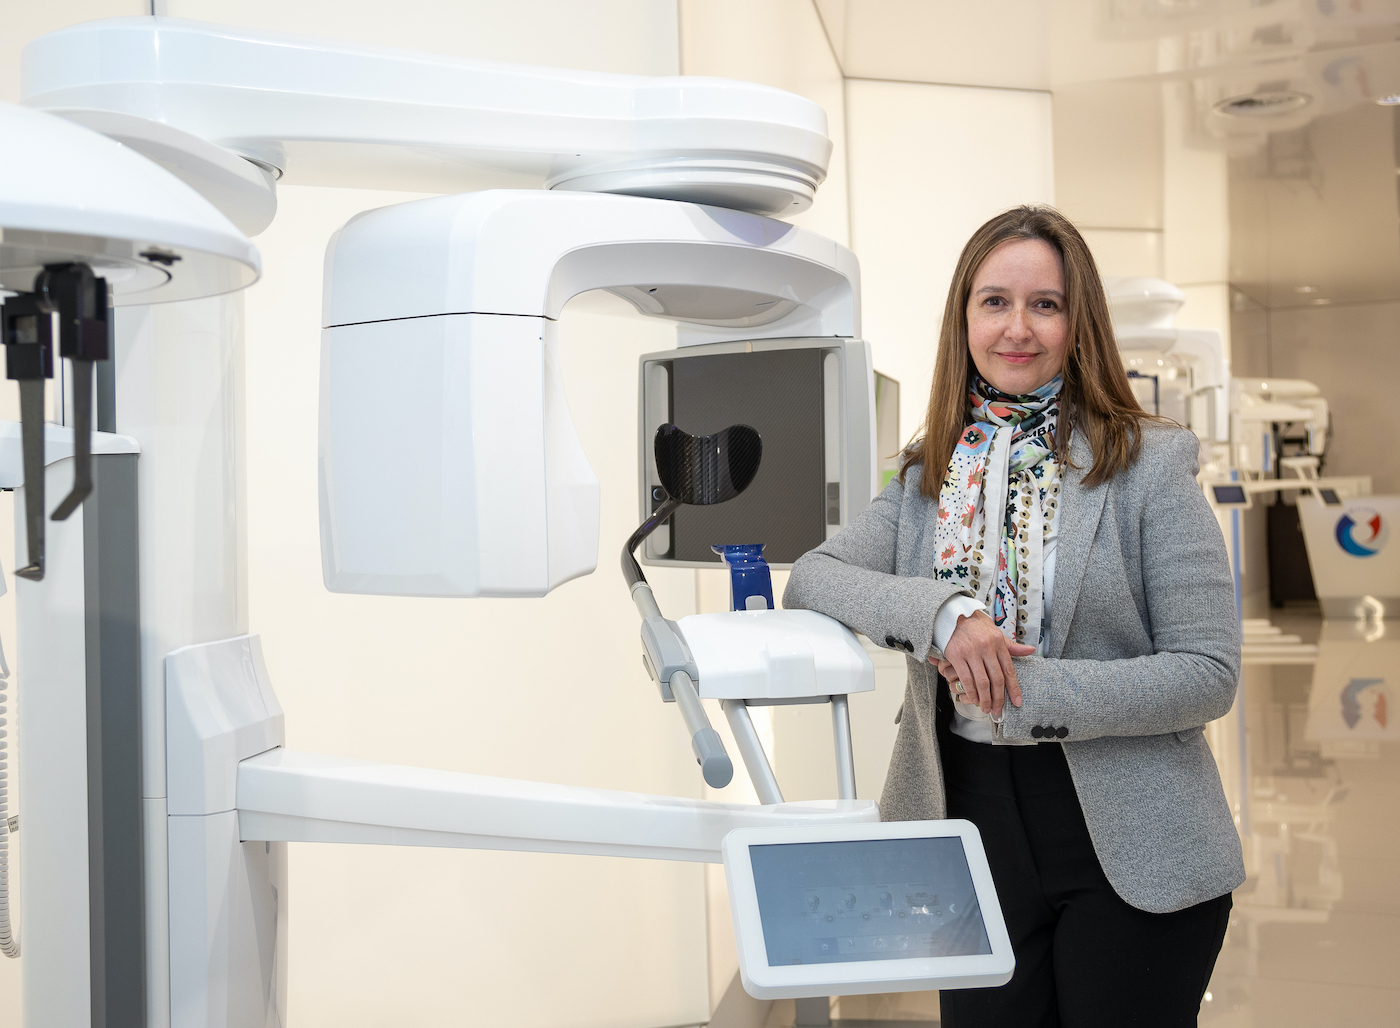 Planmeca imaging is “compatible with a modern healthcare environment”